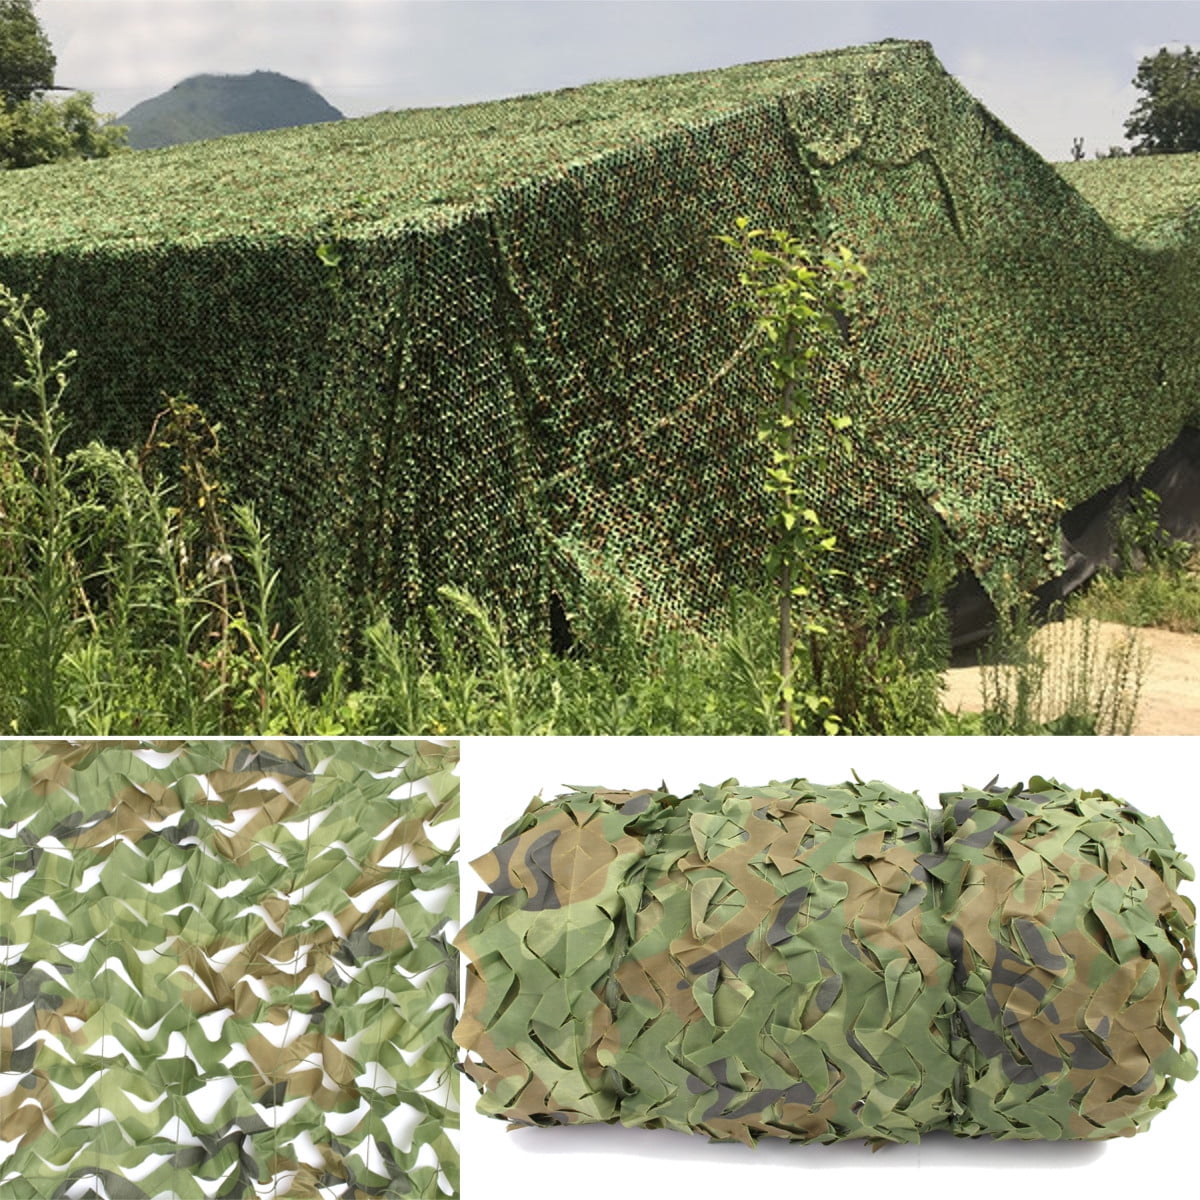 Camouflage Camo Net Hide Military Hunting Shoot Army Woodland Camping 26ftx26ft 